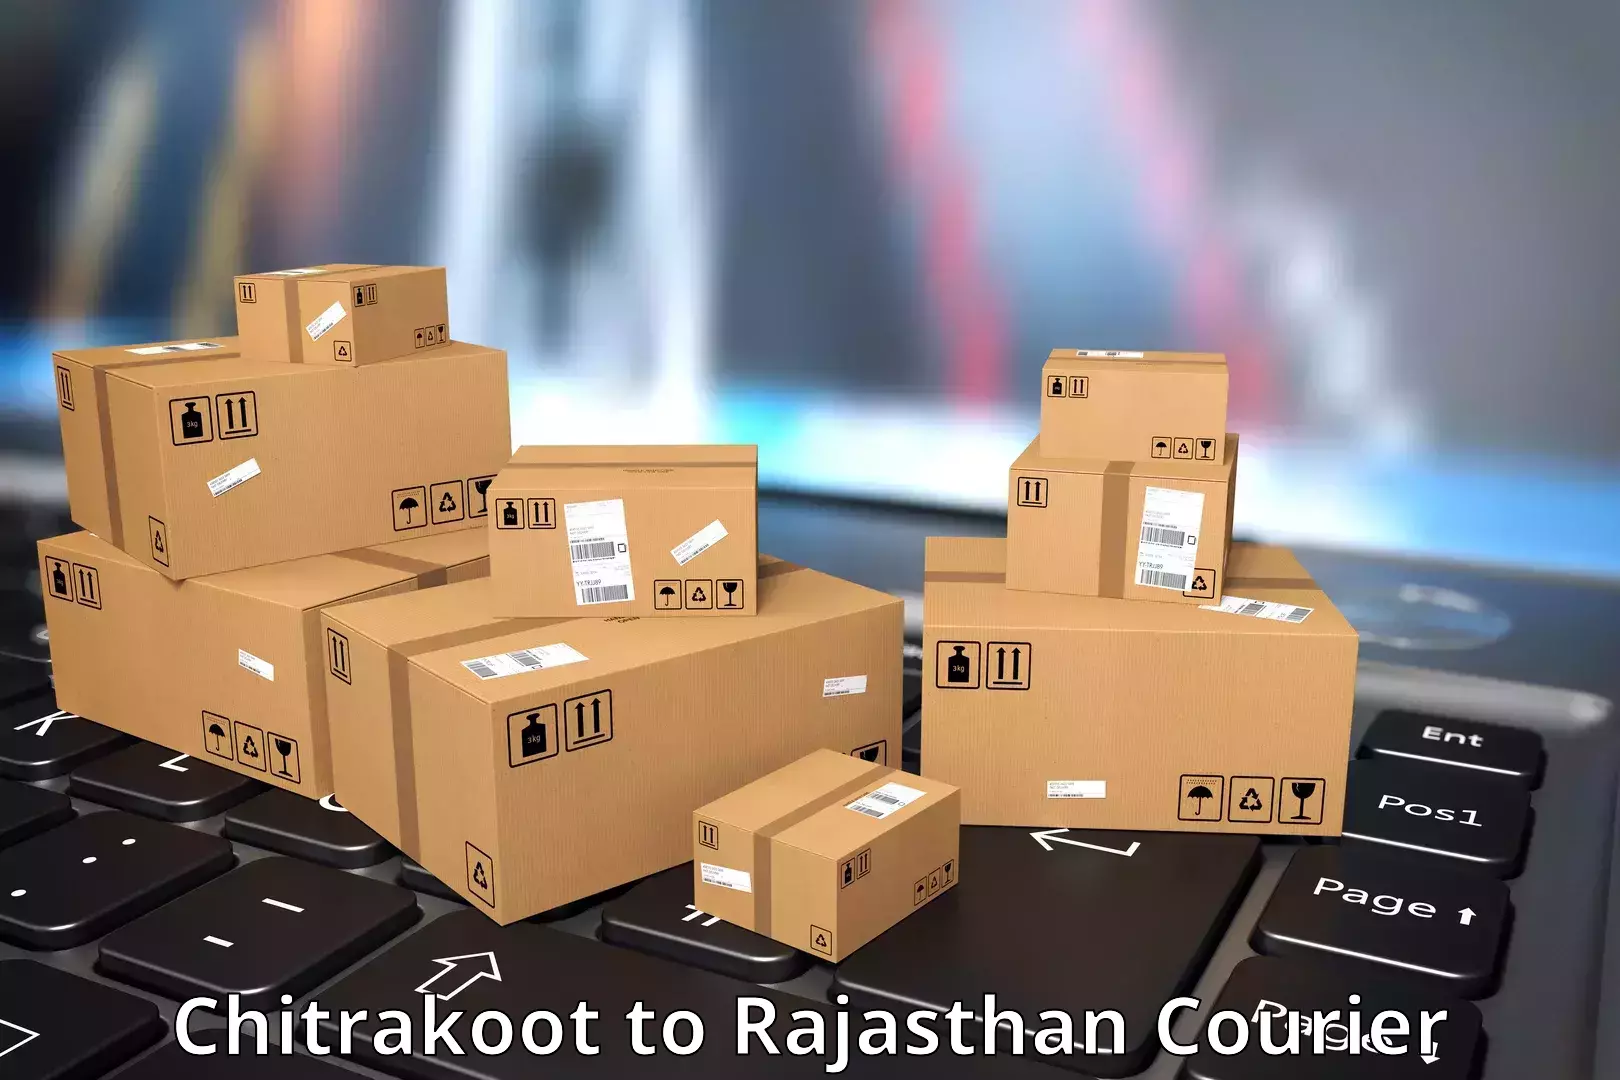 On-call courier service Chitrakoot to Dholpur